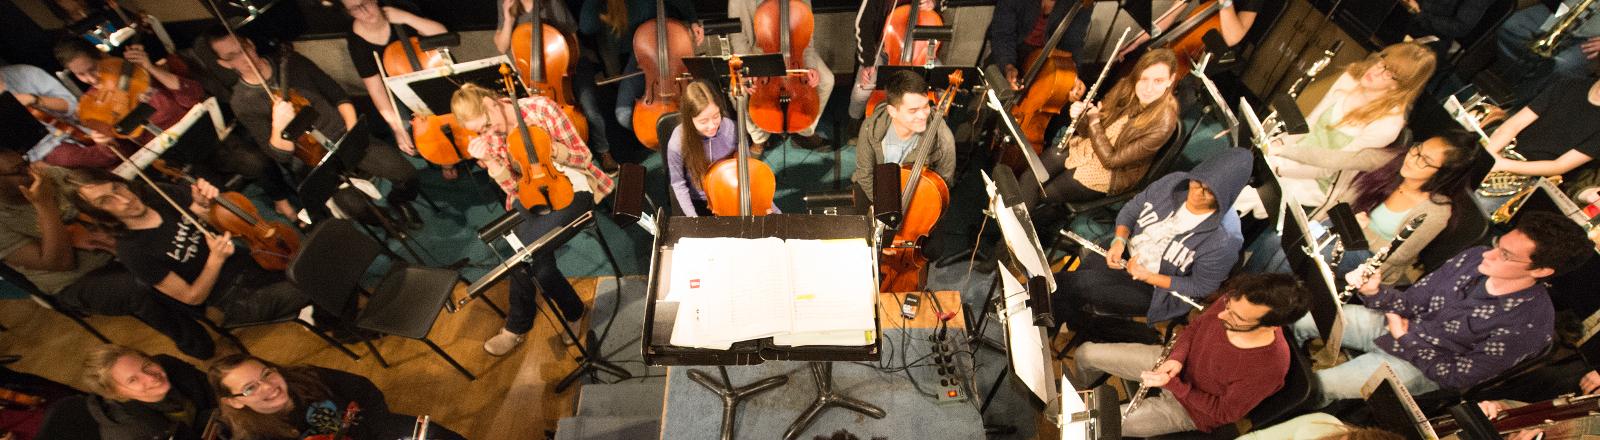 The Loyola School of Music Symphony Orchestra rehearses in the pit of Roussel Hall.